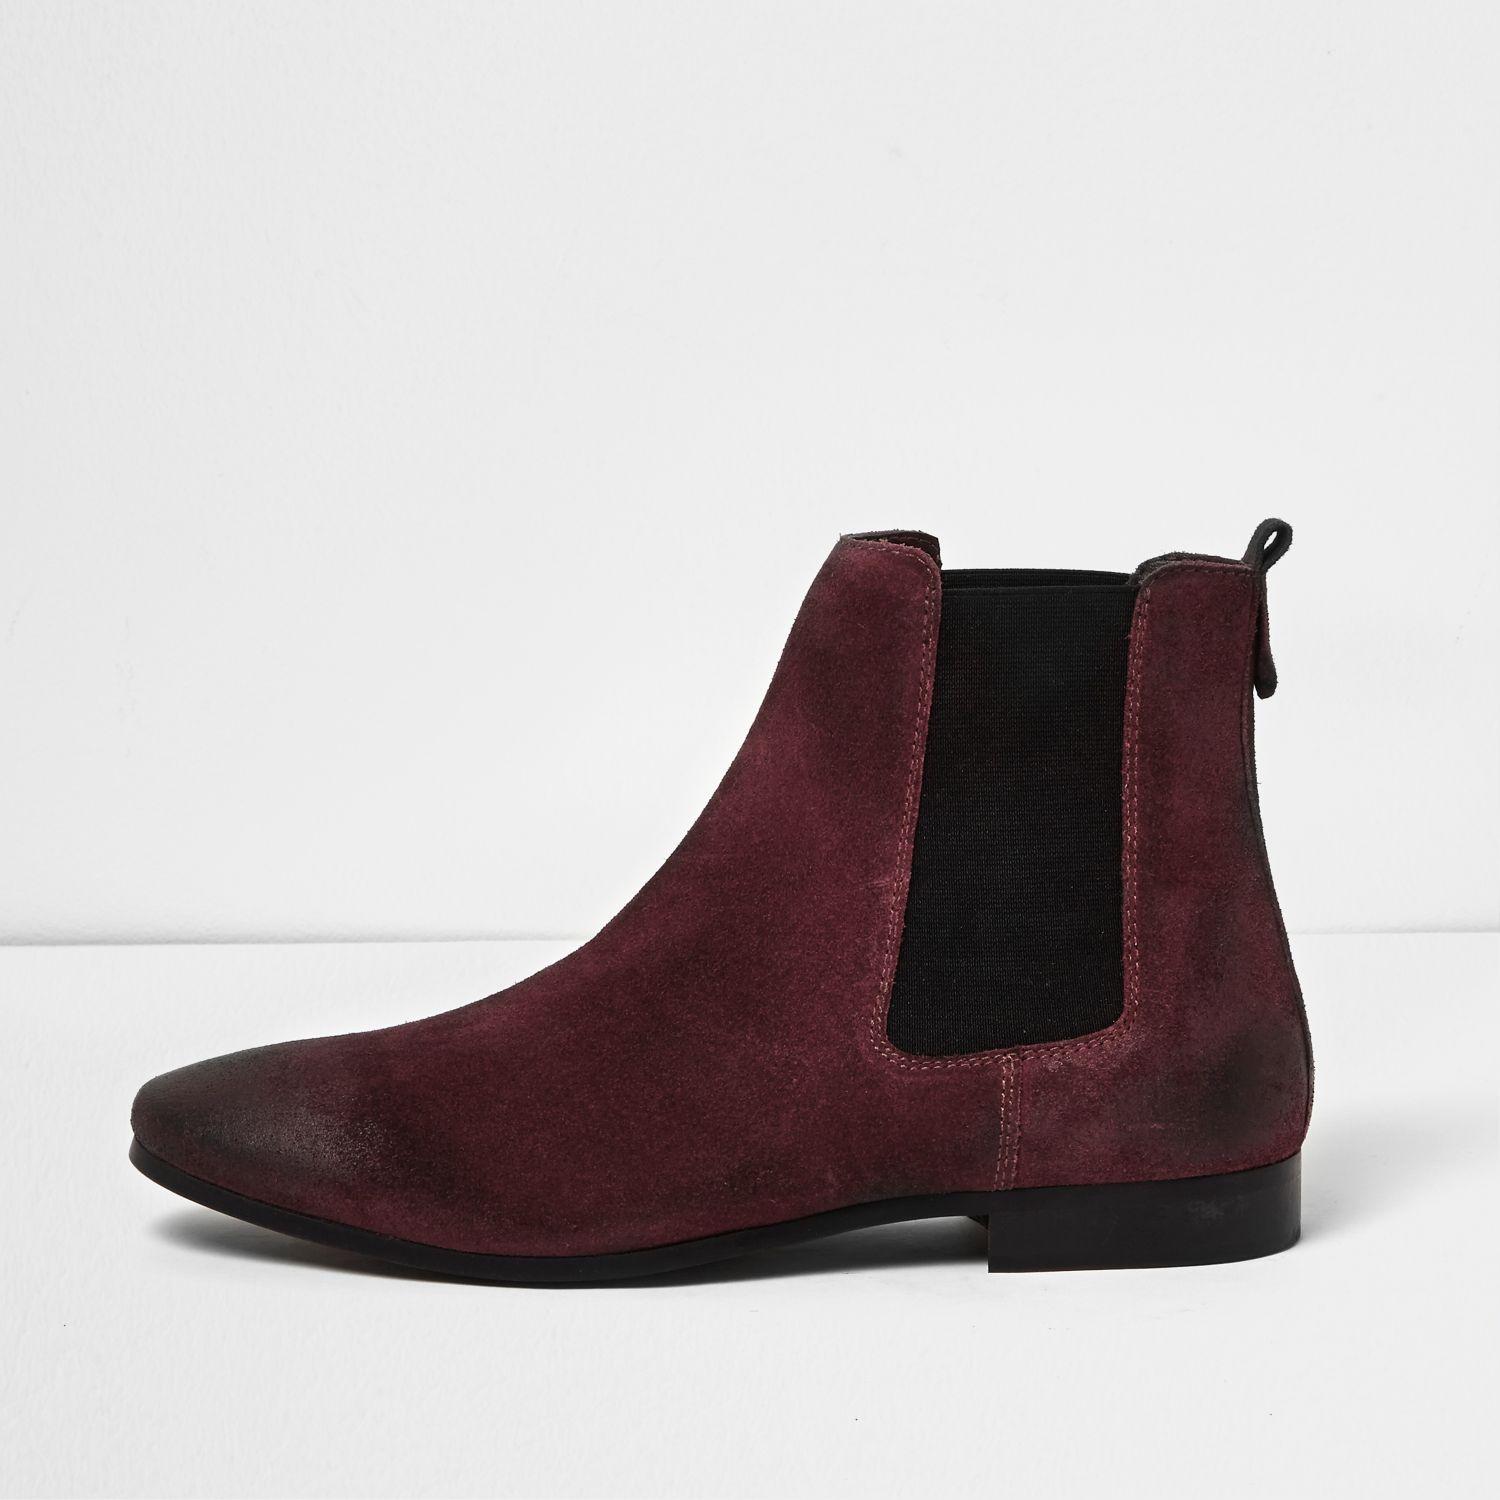 Lyst - River Island Burgundy Suede Tall Chelsea Boots in Red for Men